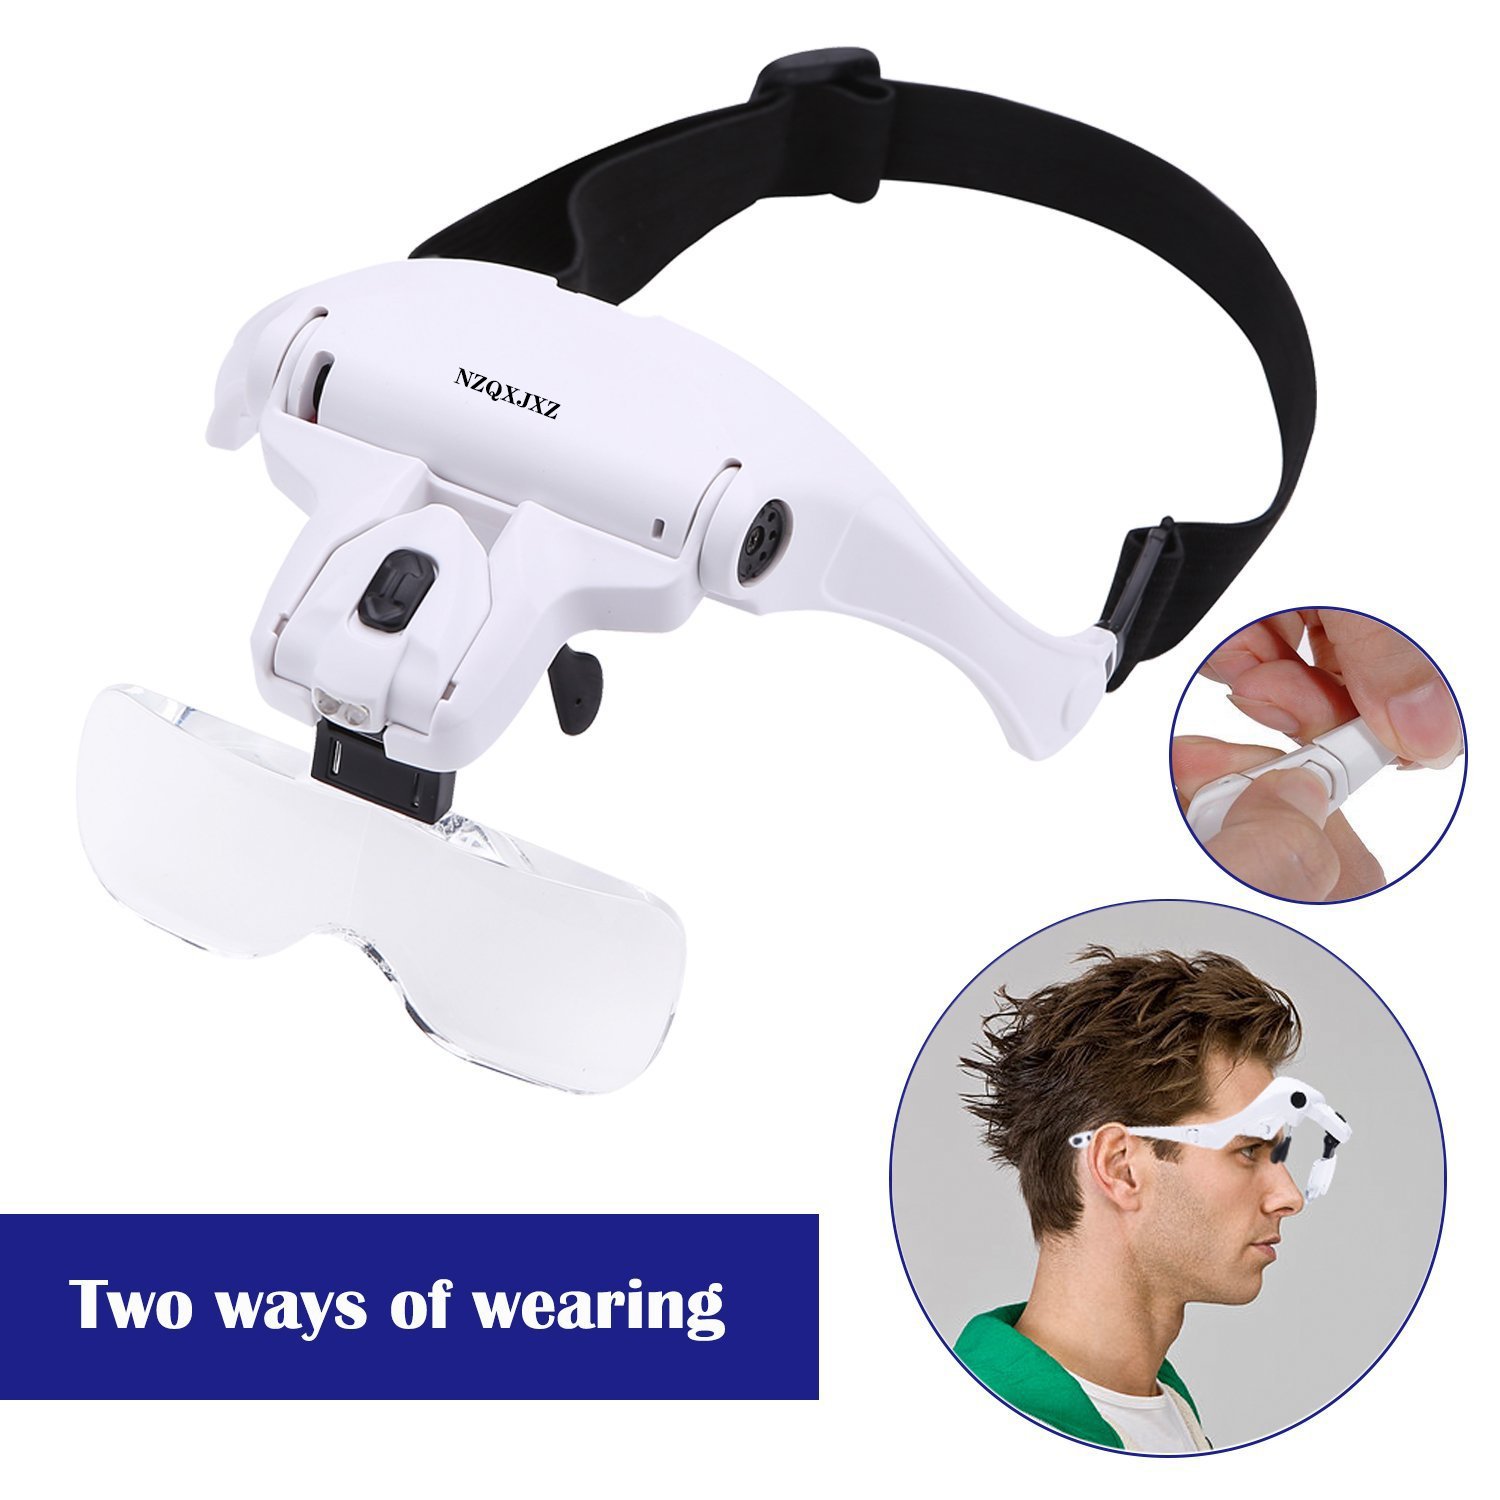 5X LENS Magnifying Glass Headset LED Light Head Magnifier Loupe With Box 